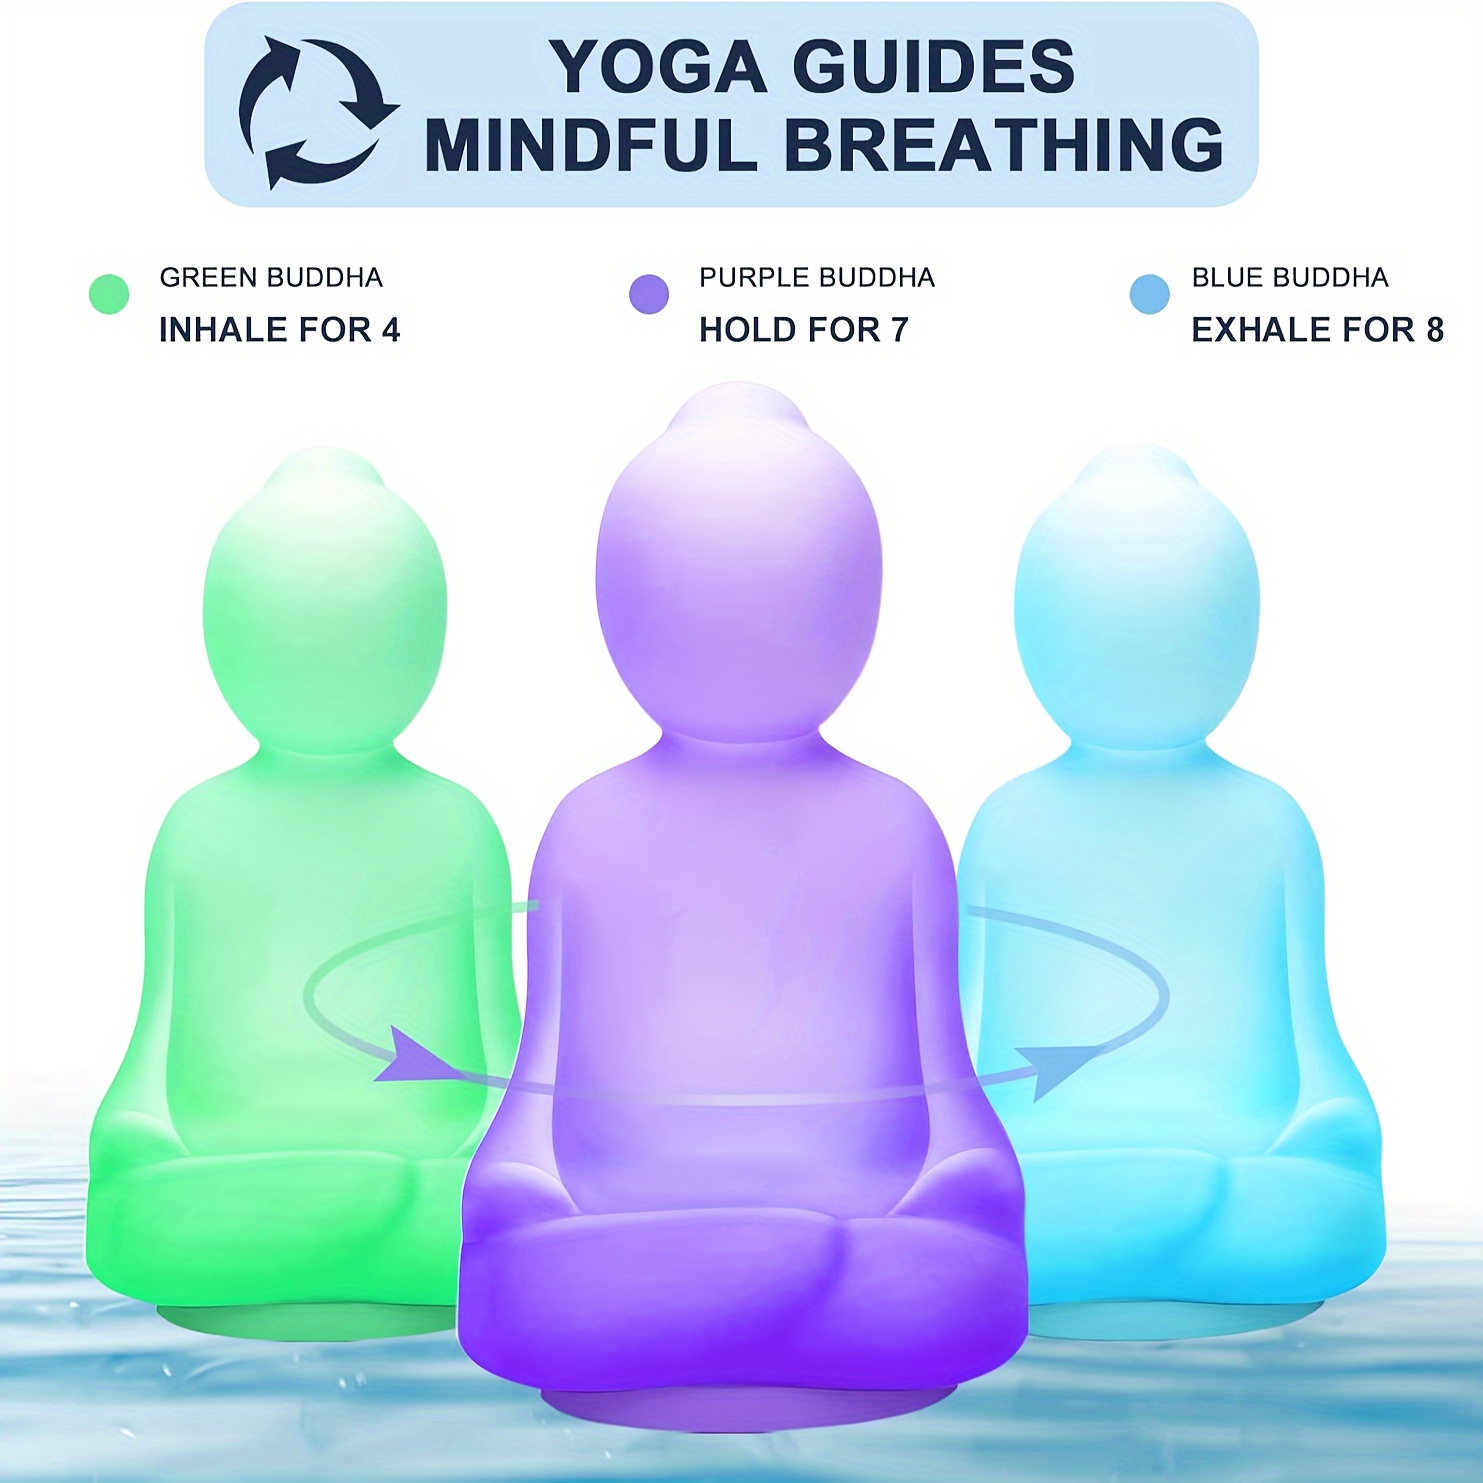 A quick guide for using the Breathing Buddha #breathe #mindfulness